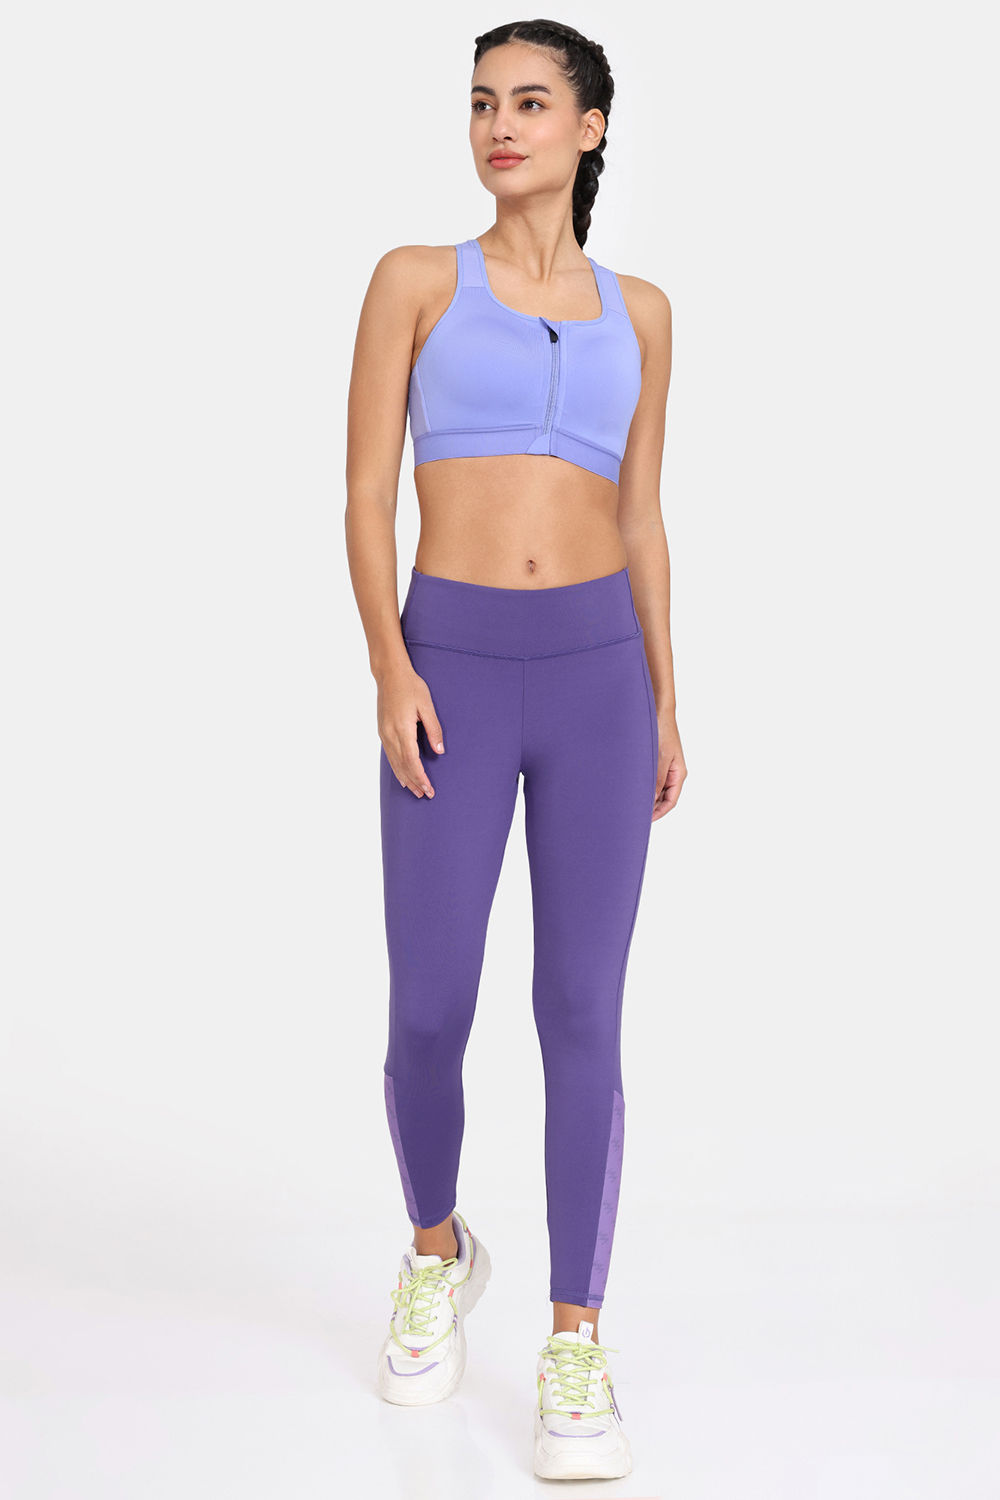 New Yoga Pants Matching Sports Bra Top Sets in 6 Colors – Loving Lane Co